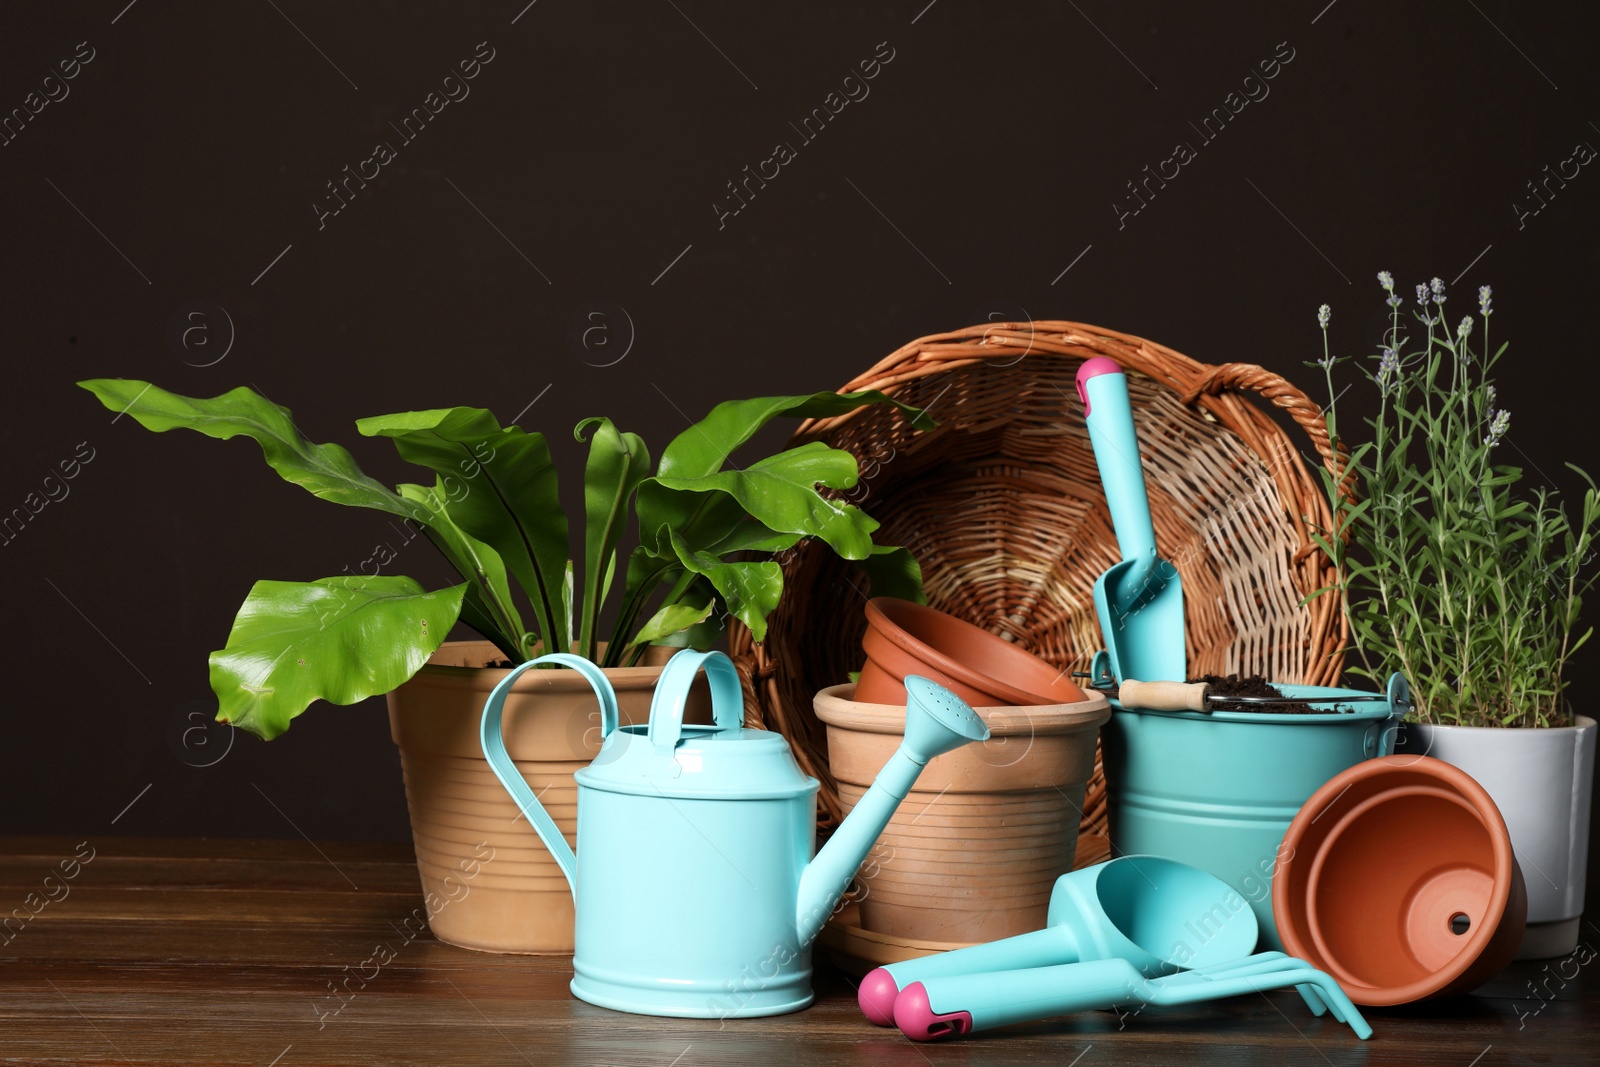 Photo of Beautiful plants and gardening tools on wooden table against brown background